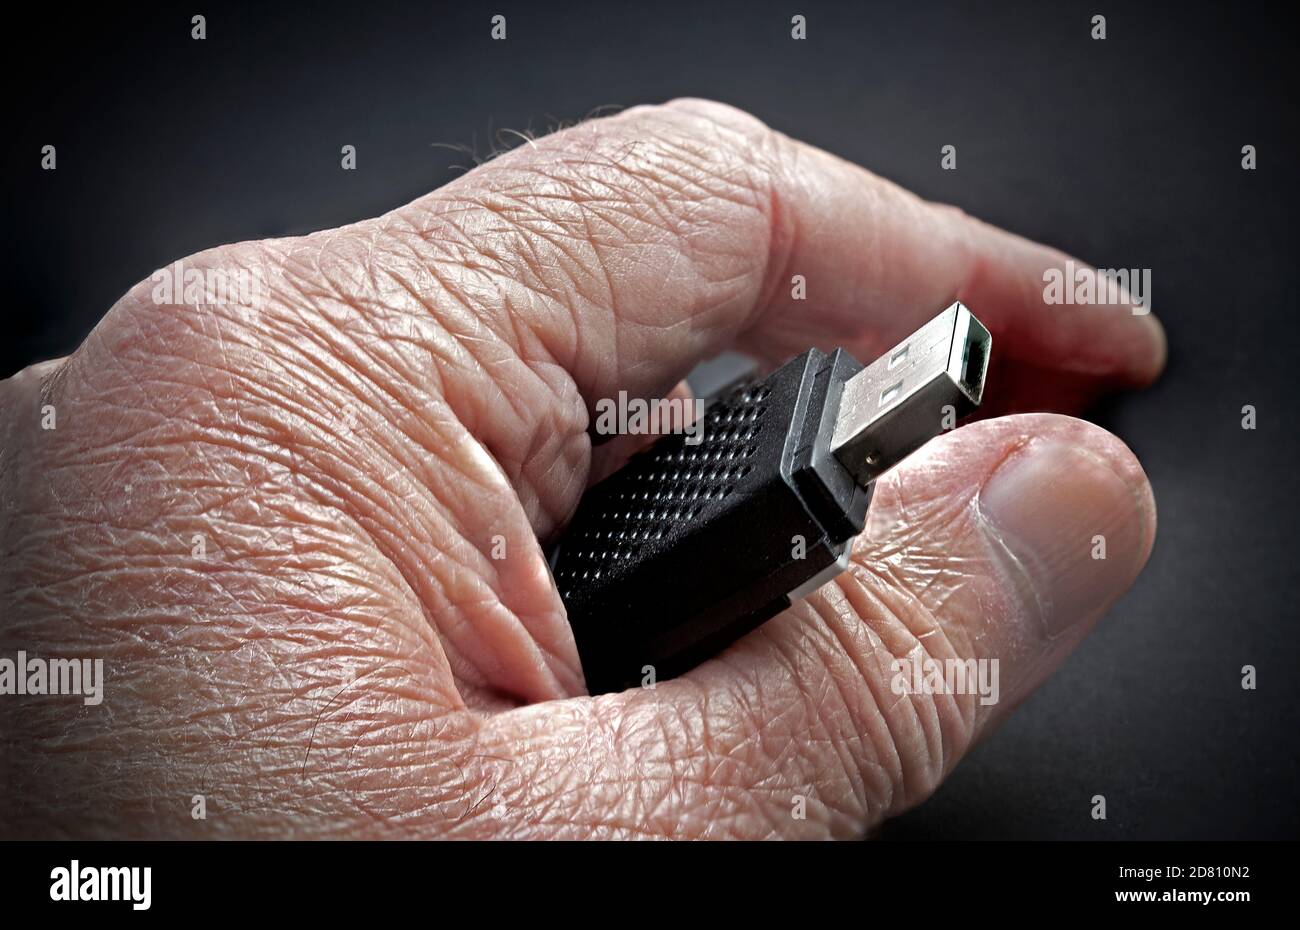 Elderly hand with wrinkles holding memory stick Stock Photo